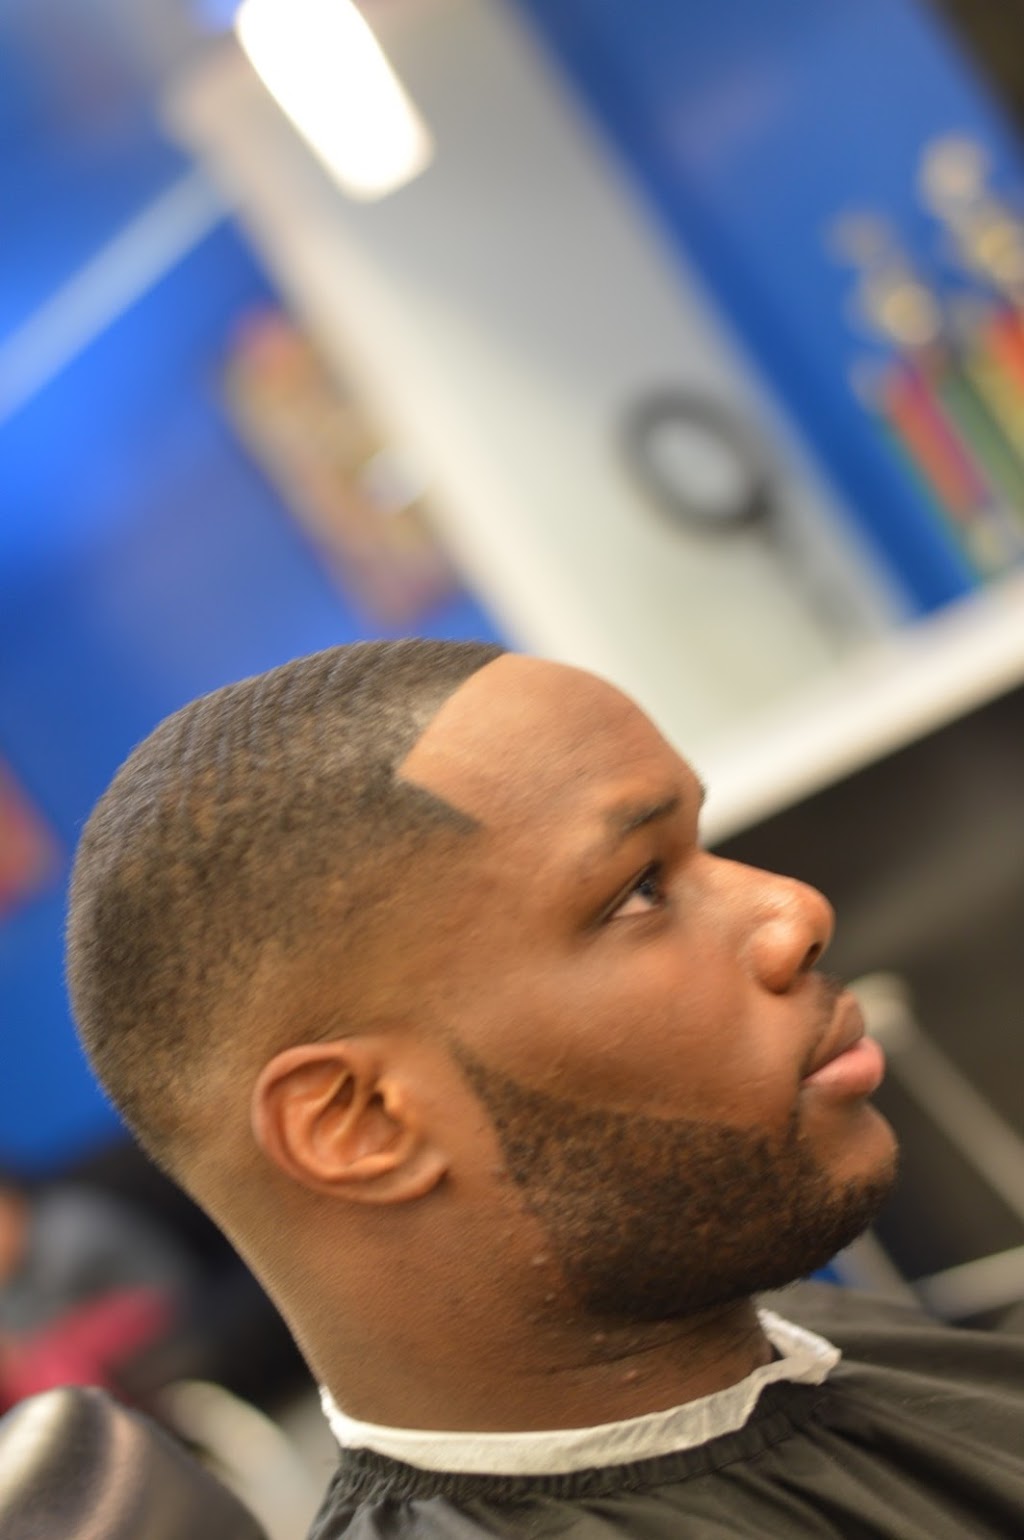 Have I Cut You Yet??? | 6350 Plantation Center Dr suite 109 unit 109, Raleigh, NC 27616, USA | Phone: (919) 278-7234